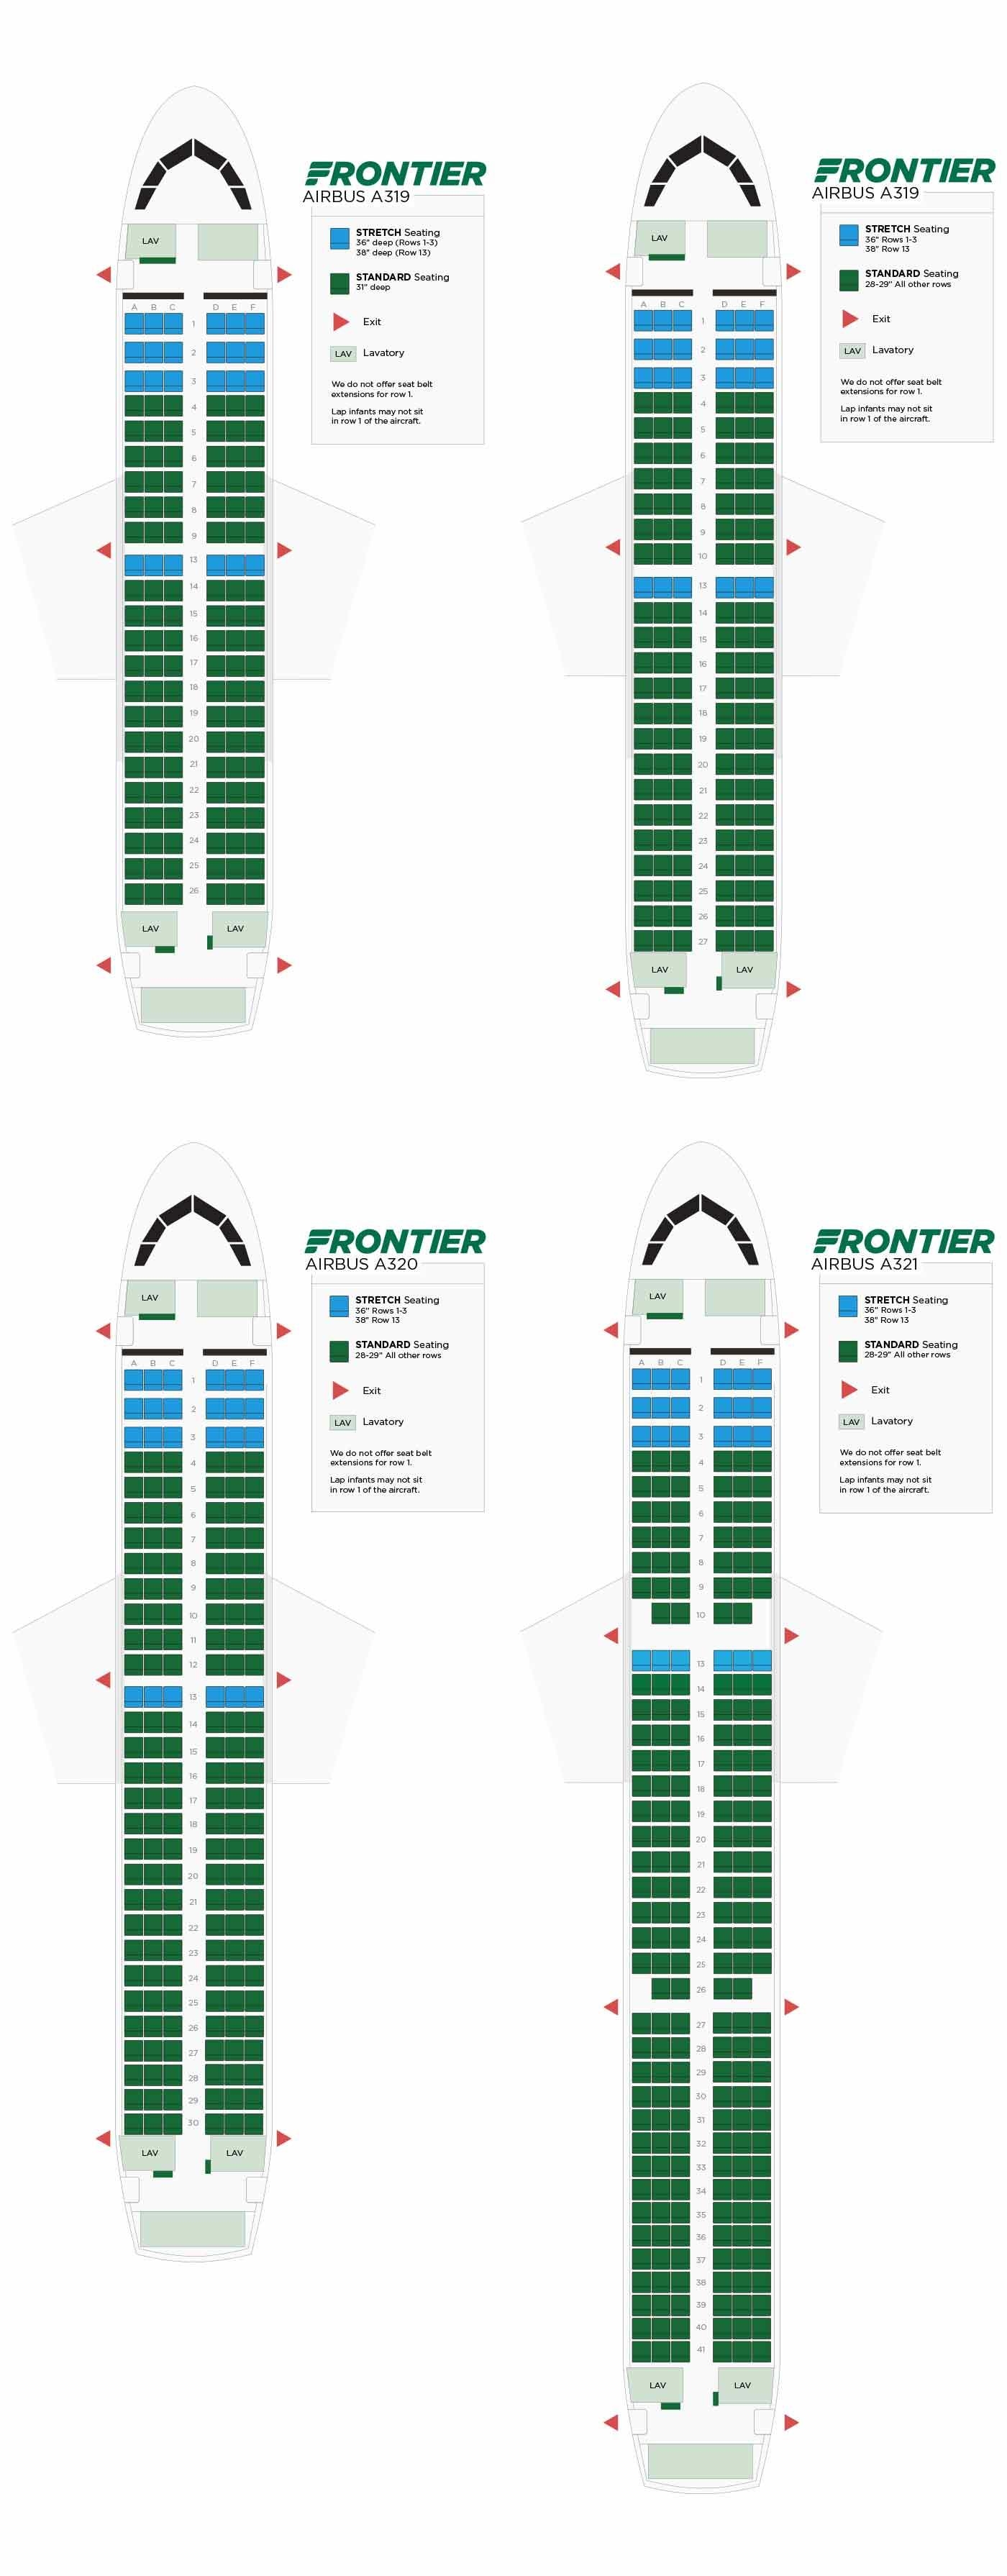 Frontier Airbus A321 Seating